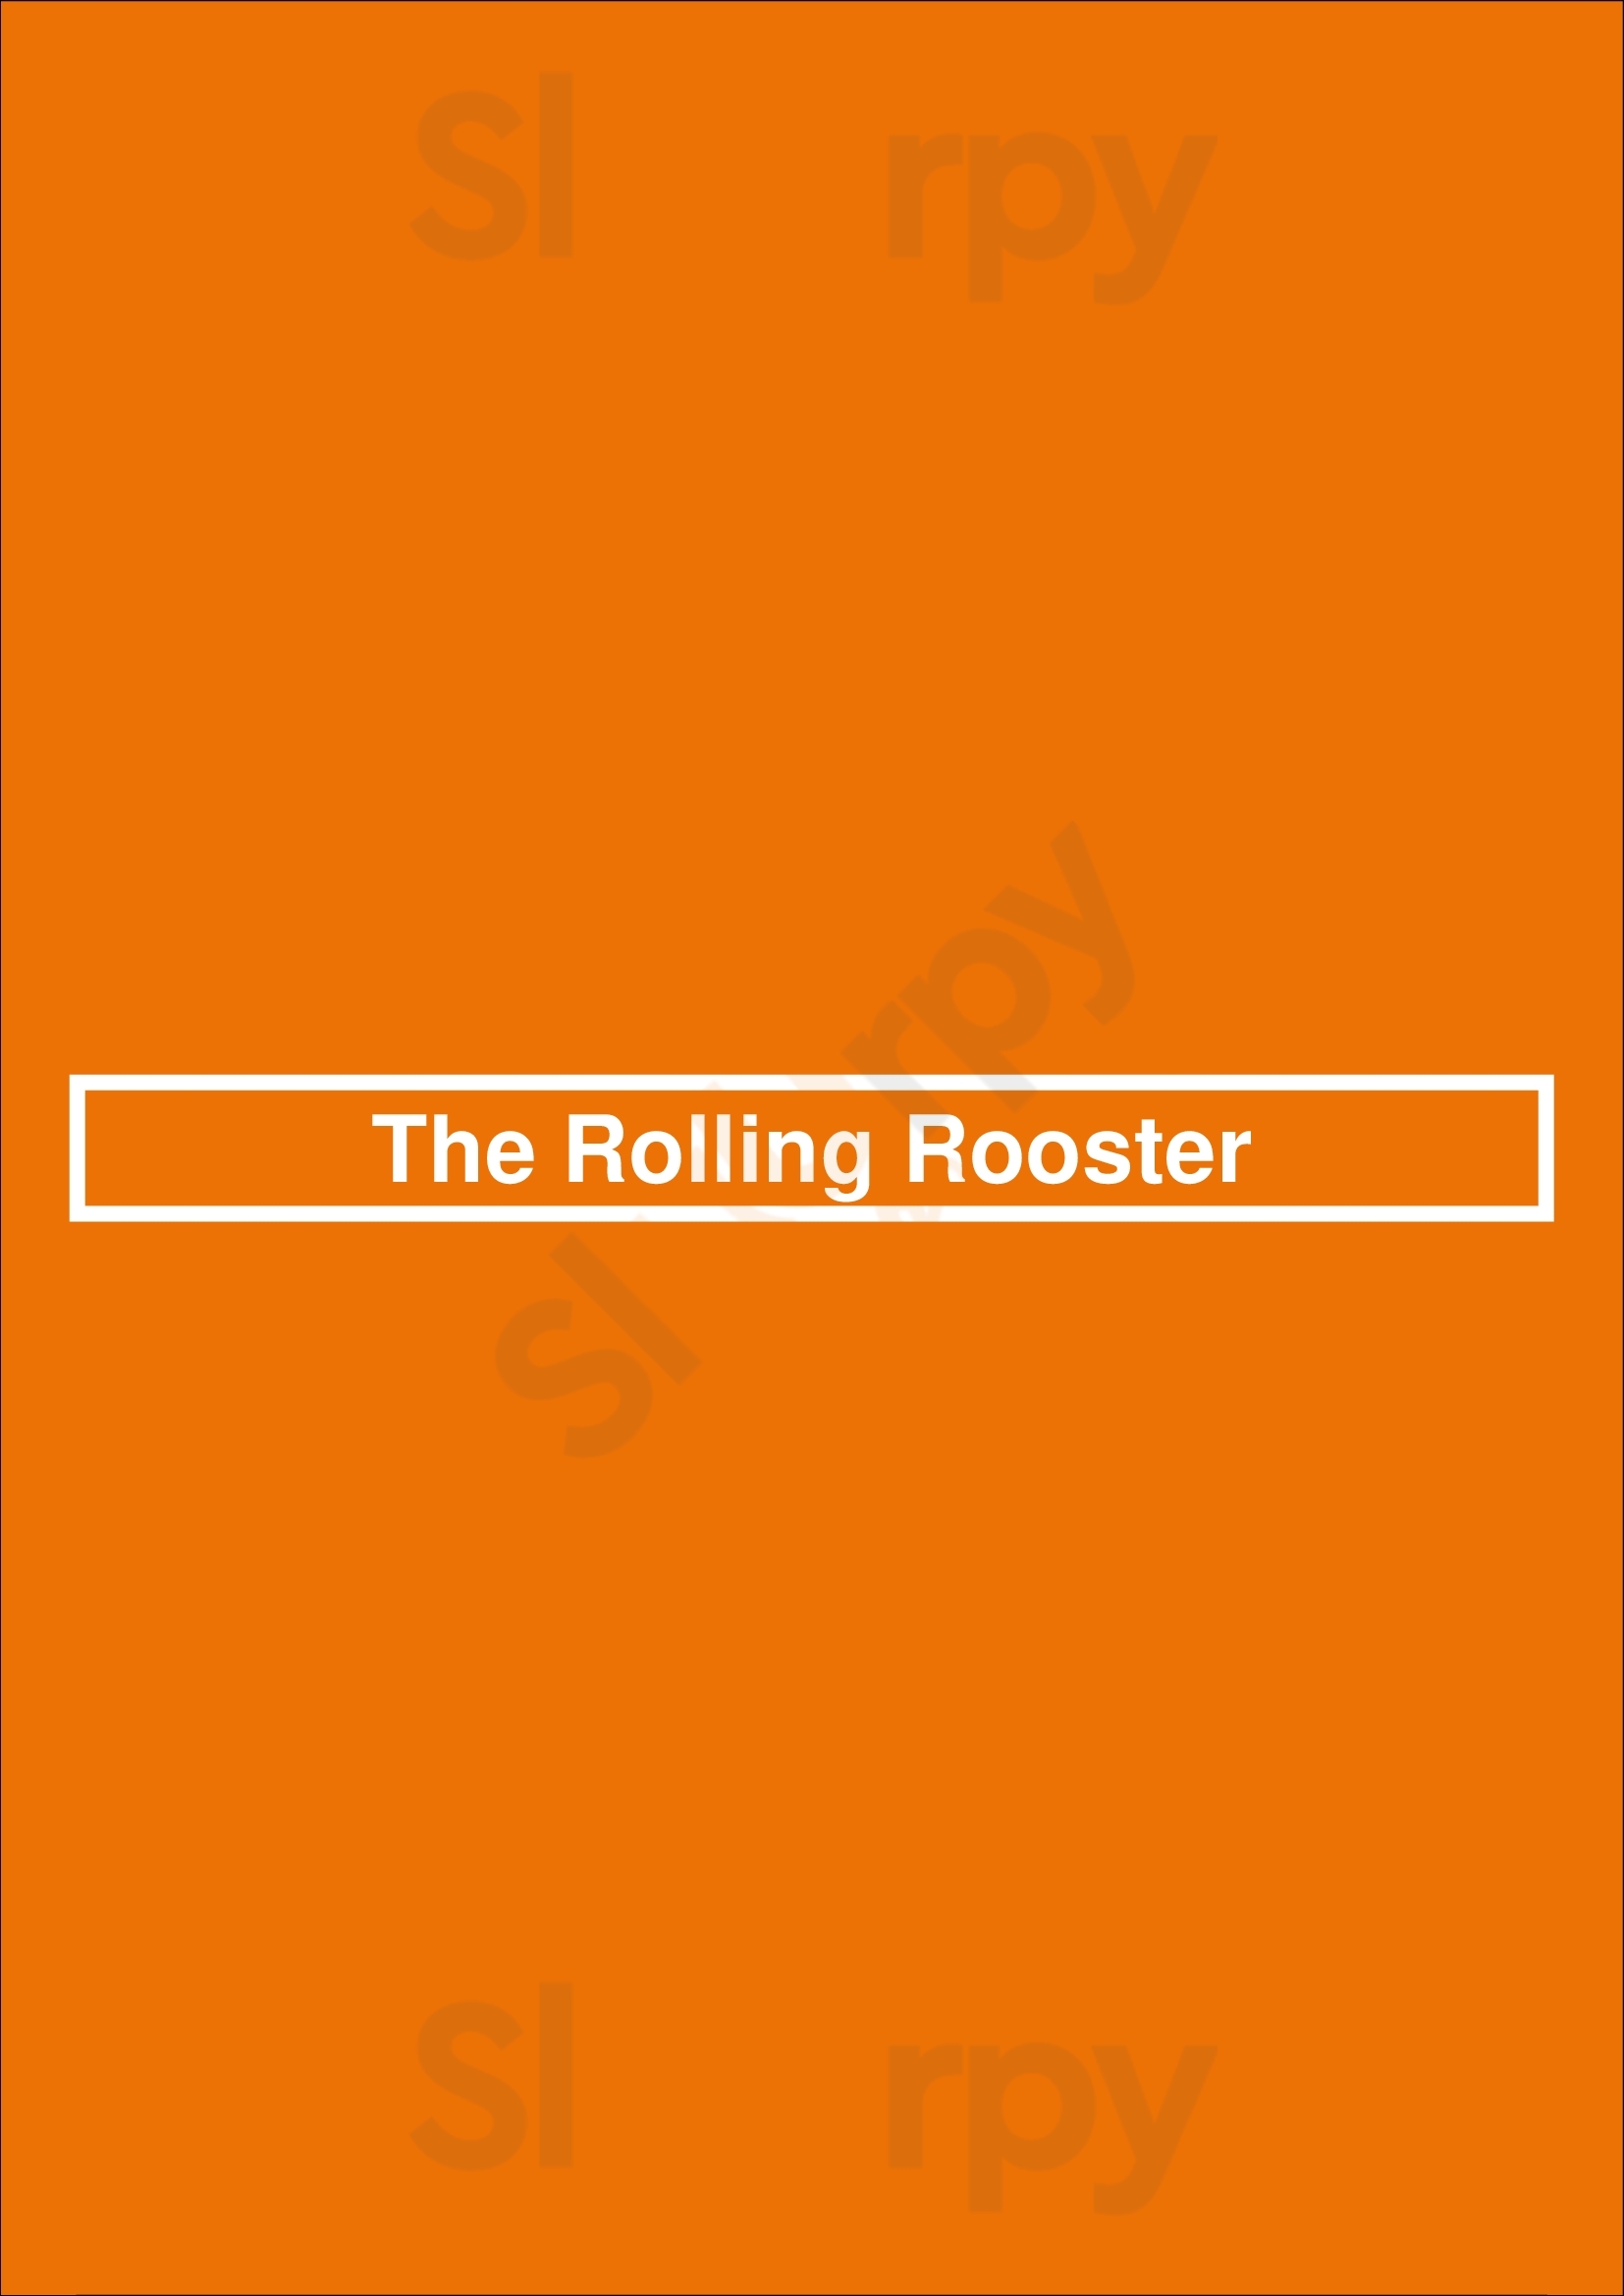 The Rolling Rooster Austin Menu - 1